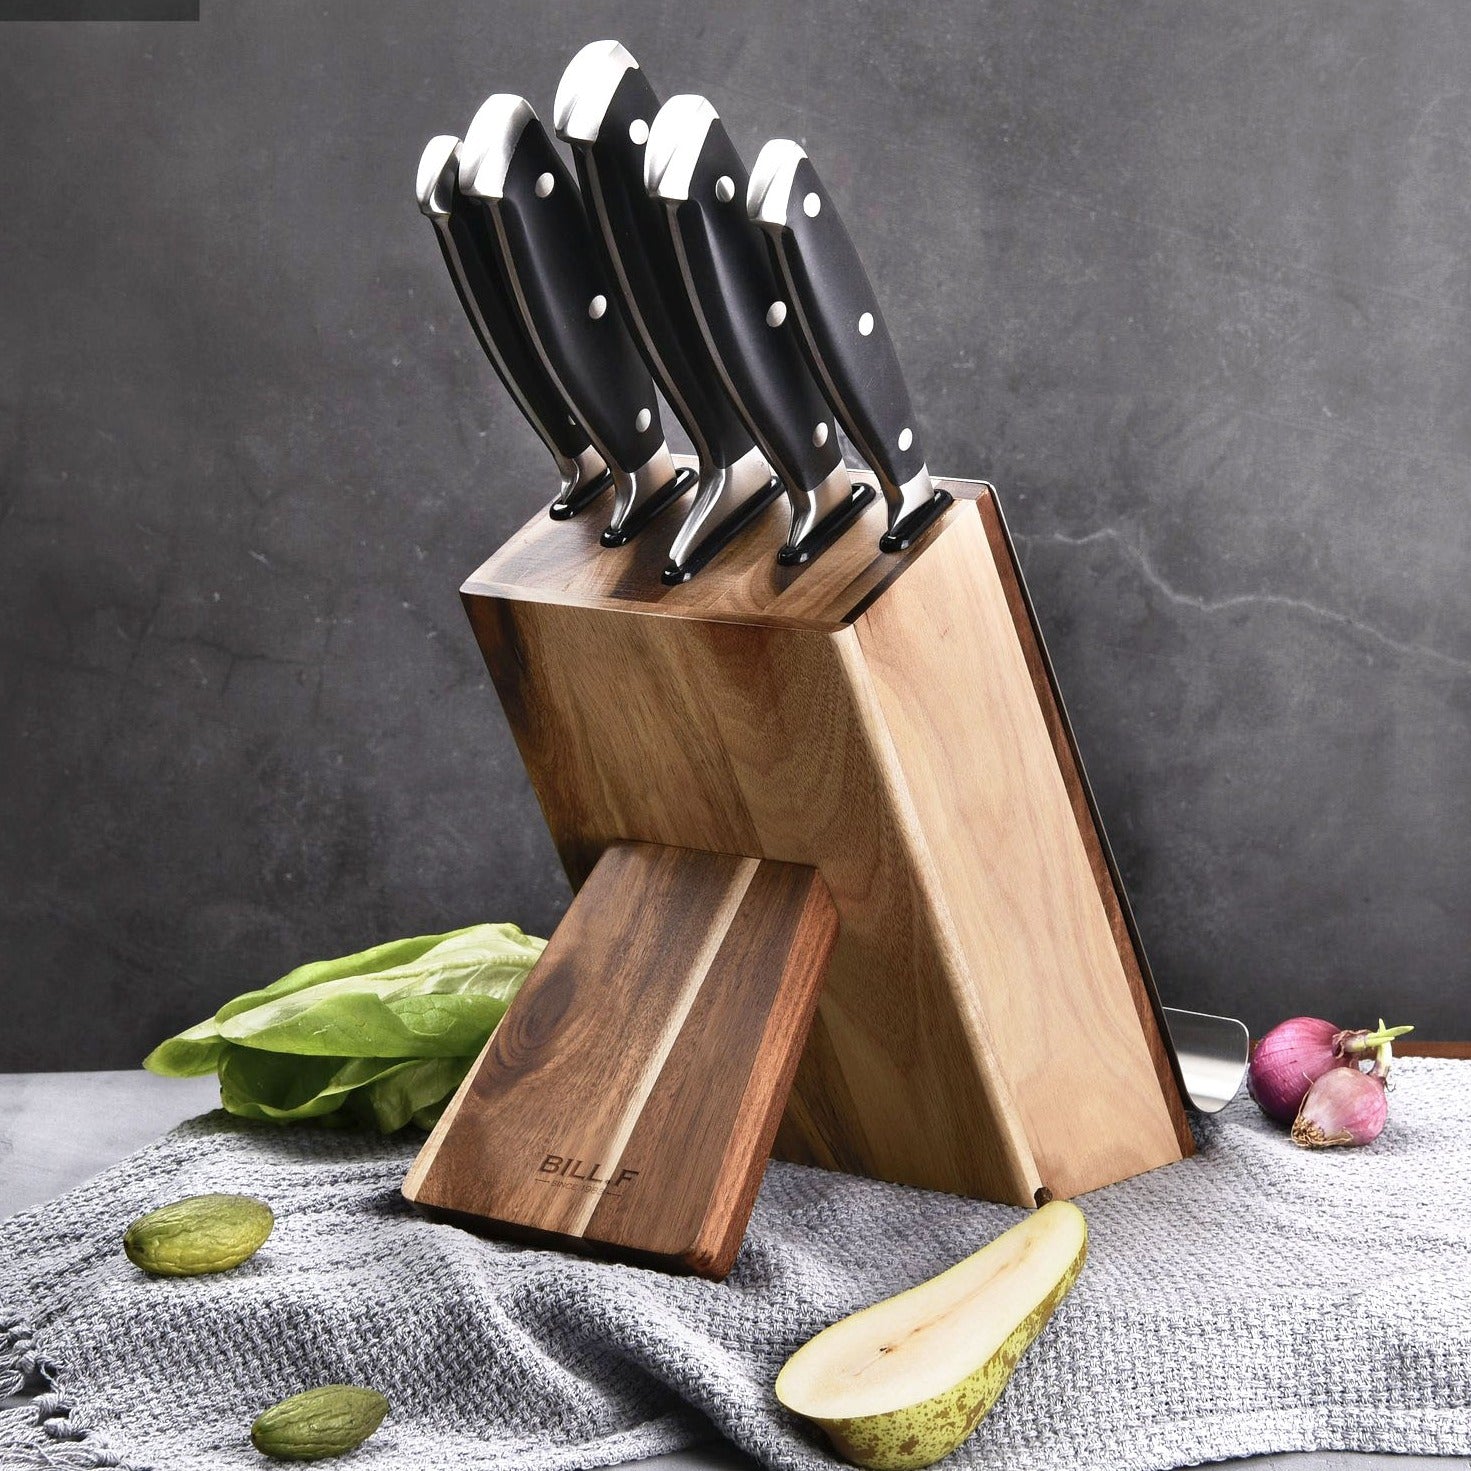 Bill.F® 6 Pieces Wooden Knife Block Set With Tablet/Cookbook Stand – BillF